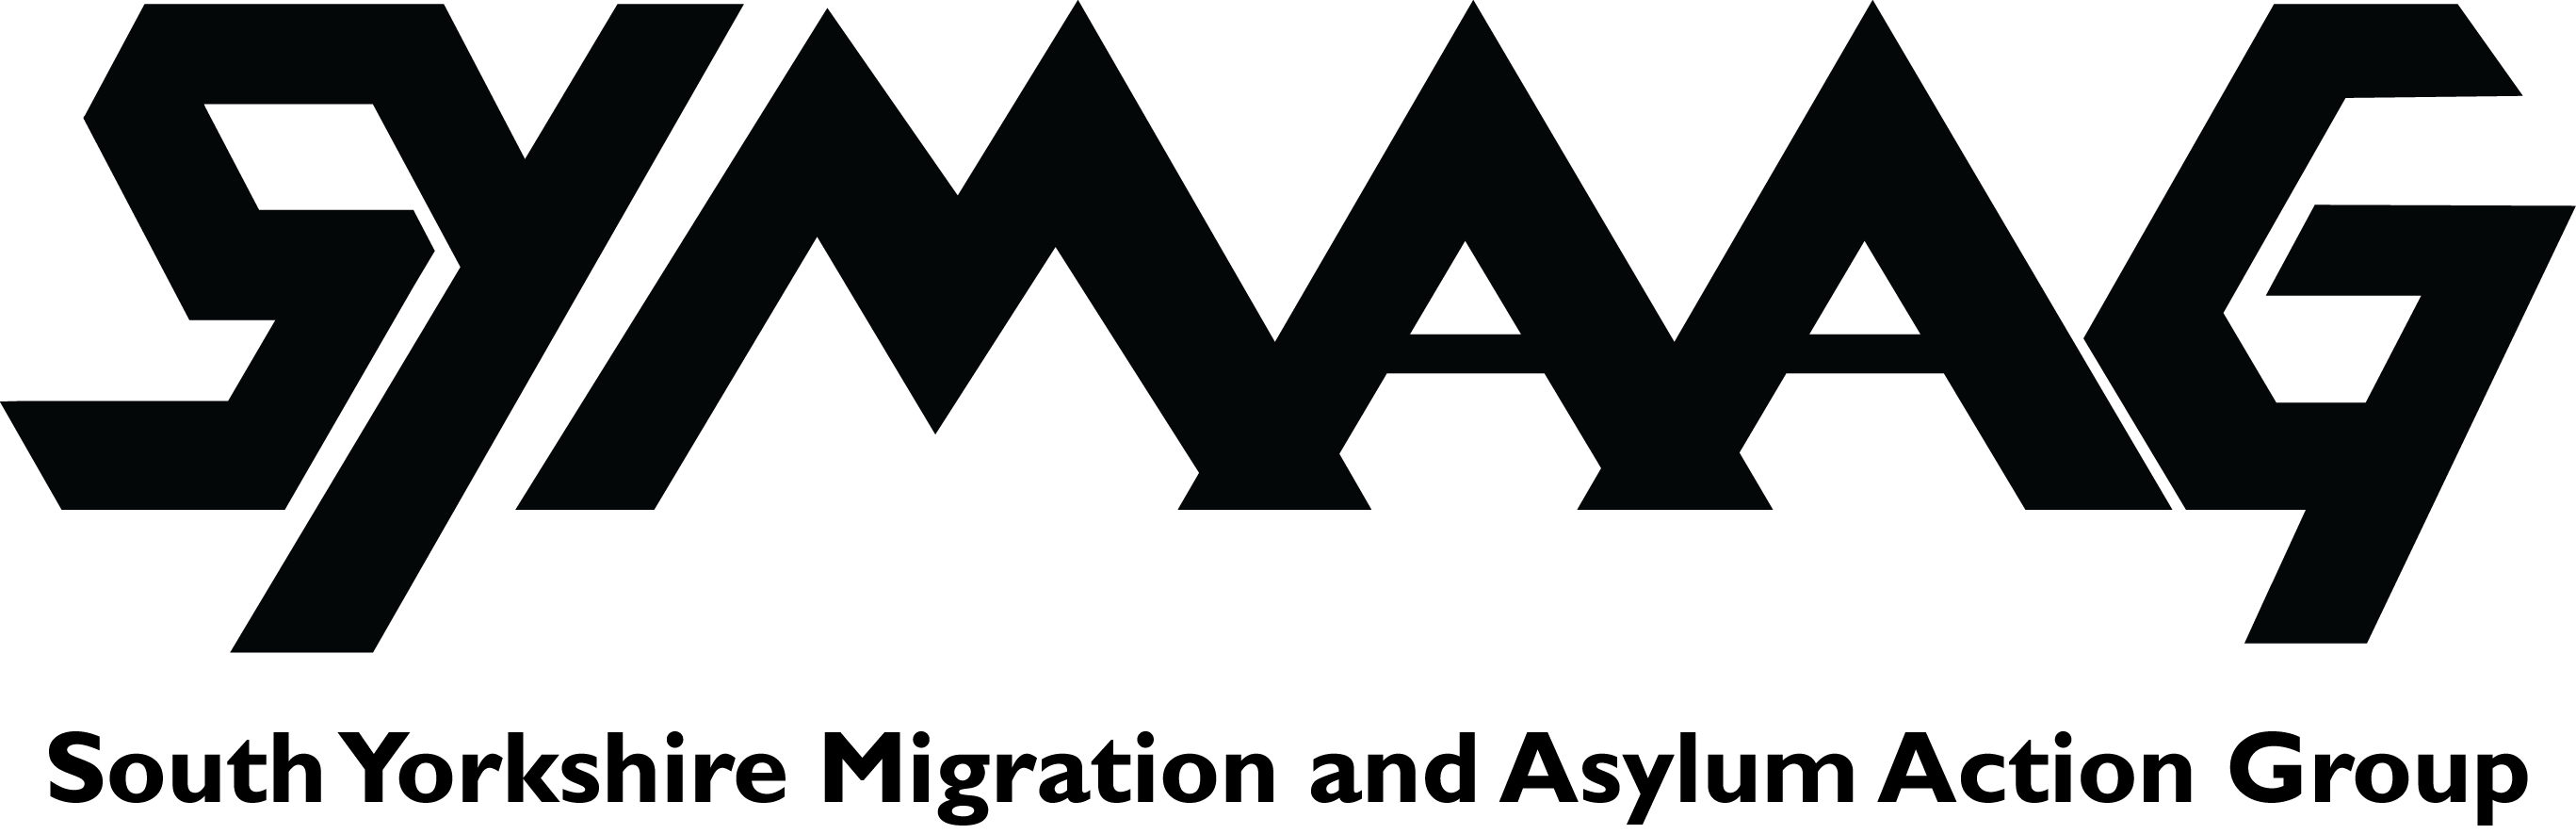 South Yorkshire Migration and Asylum Action Group (SYMAAG)